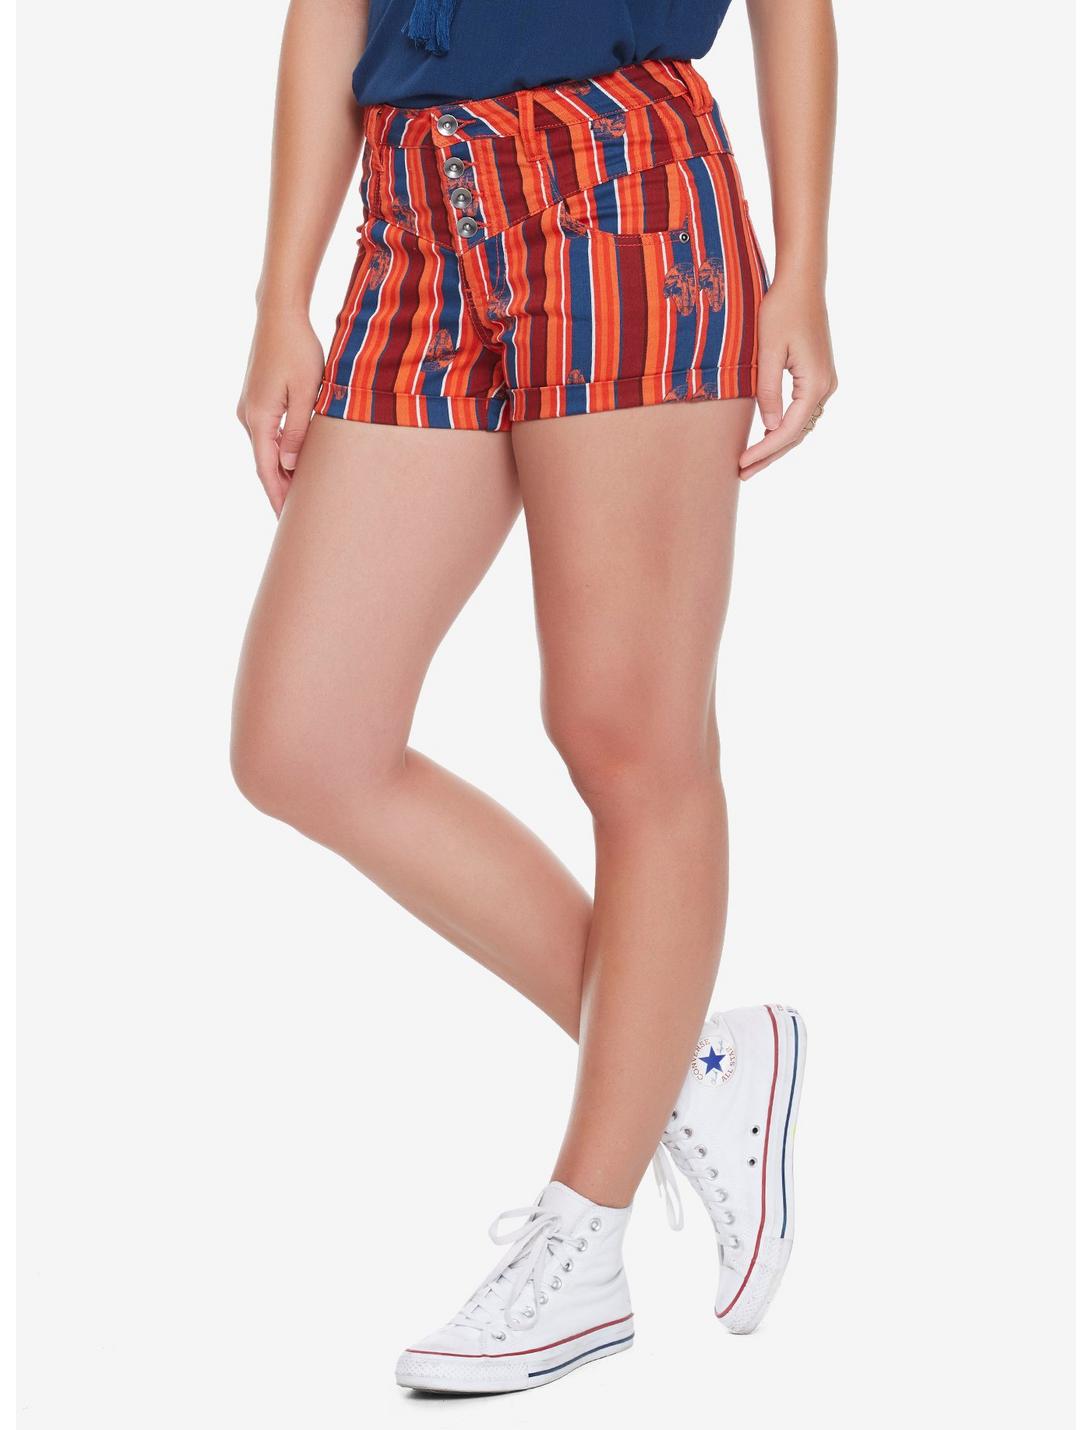 Star Wars Solo Striped High-Waisted Shorts, MULTI, hi-res